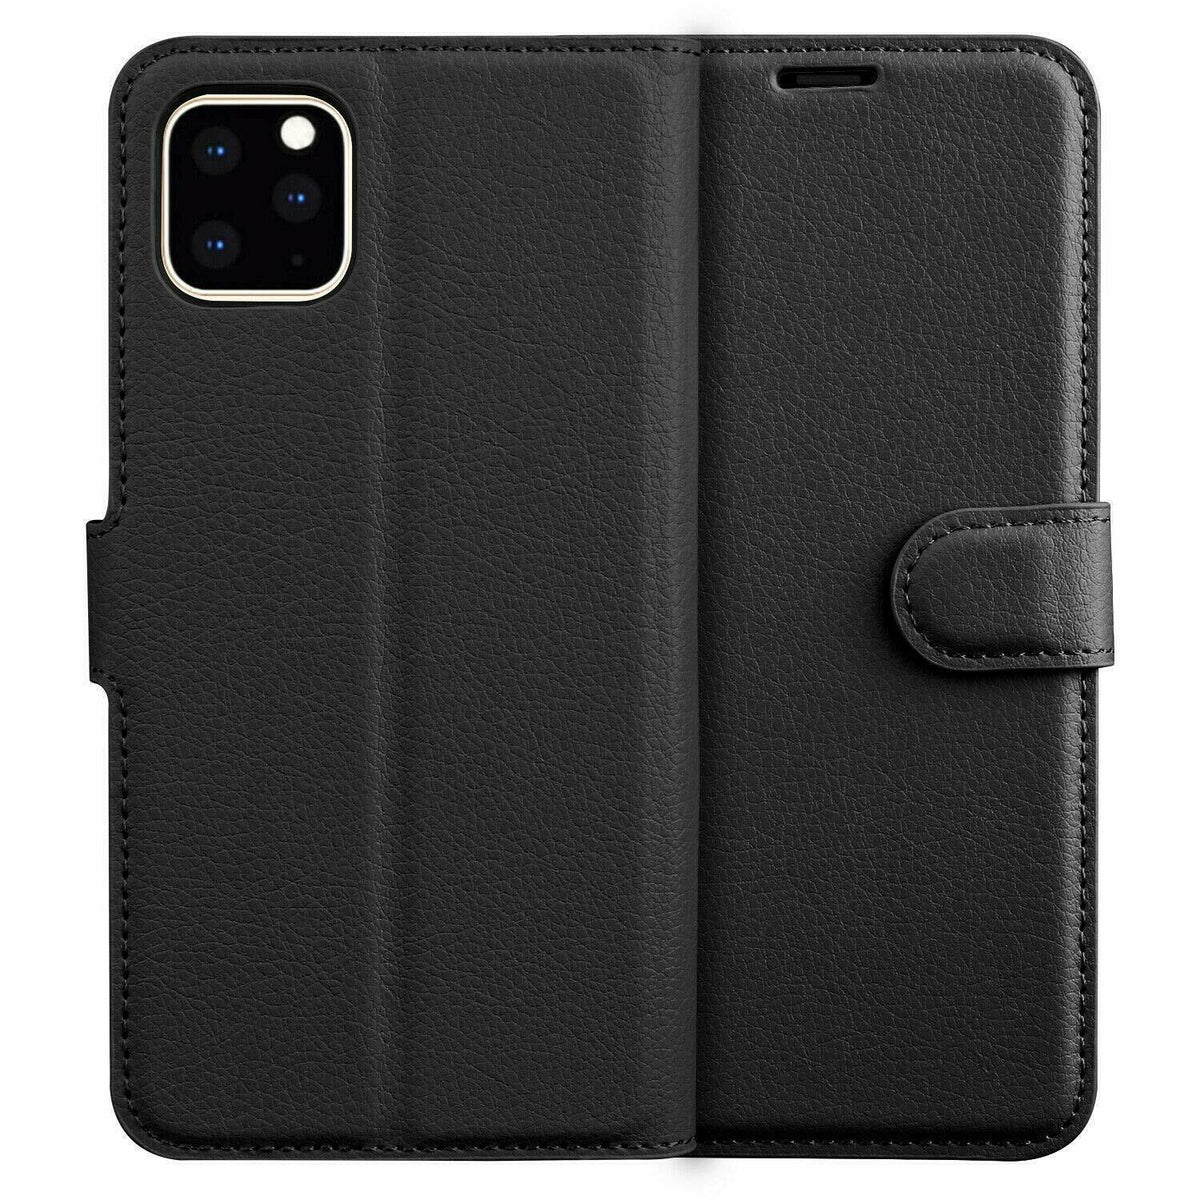 iPhone 12 Mini 5.4” Leather Flip Wallet Case with Cash / Card Slots